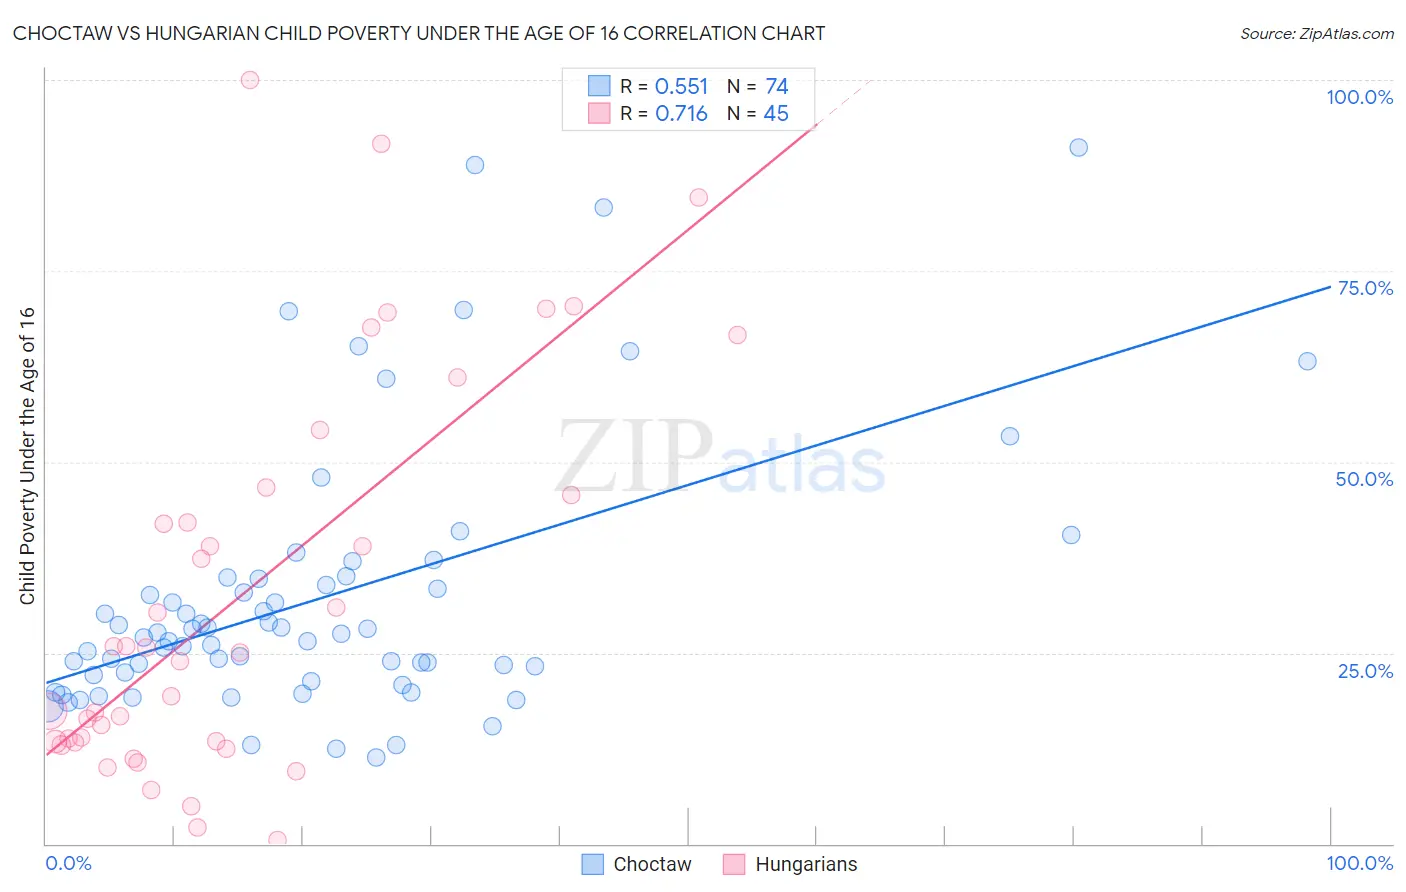 Choctaw vs Hungarian Child Poverty Under the Age of 16